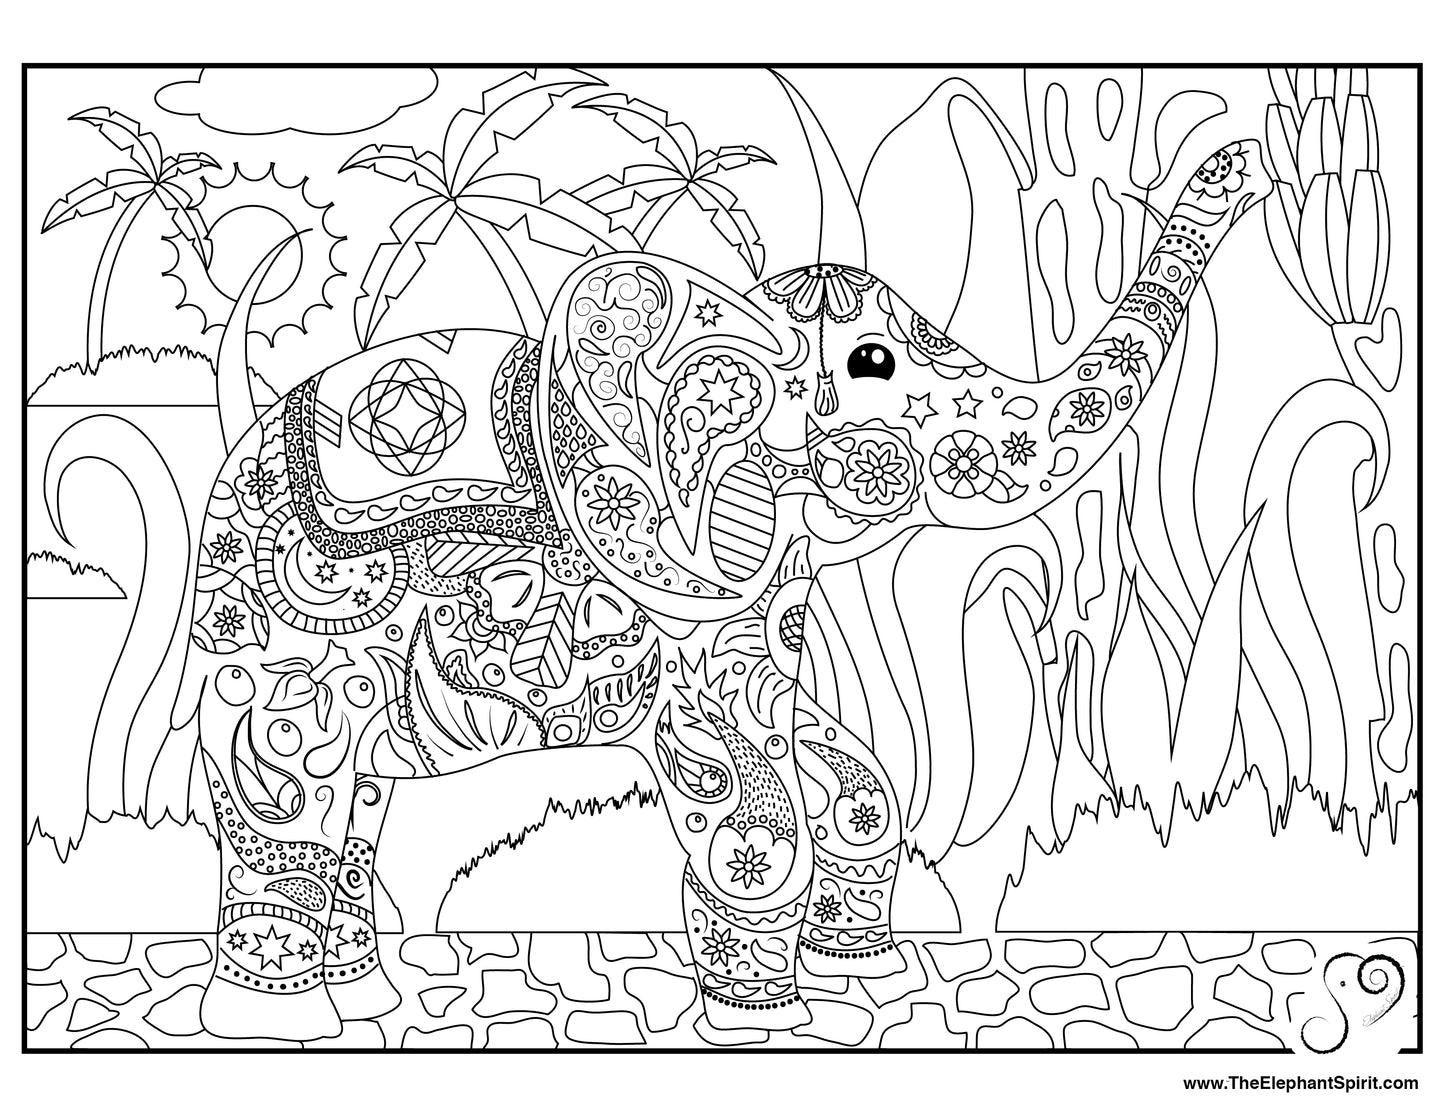 FREE Coloring Page 09-01